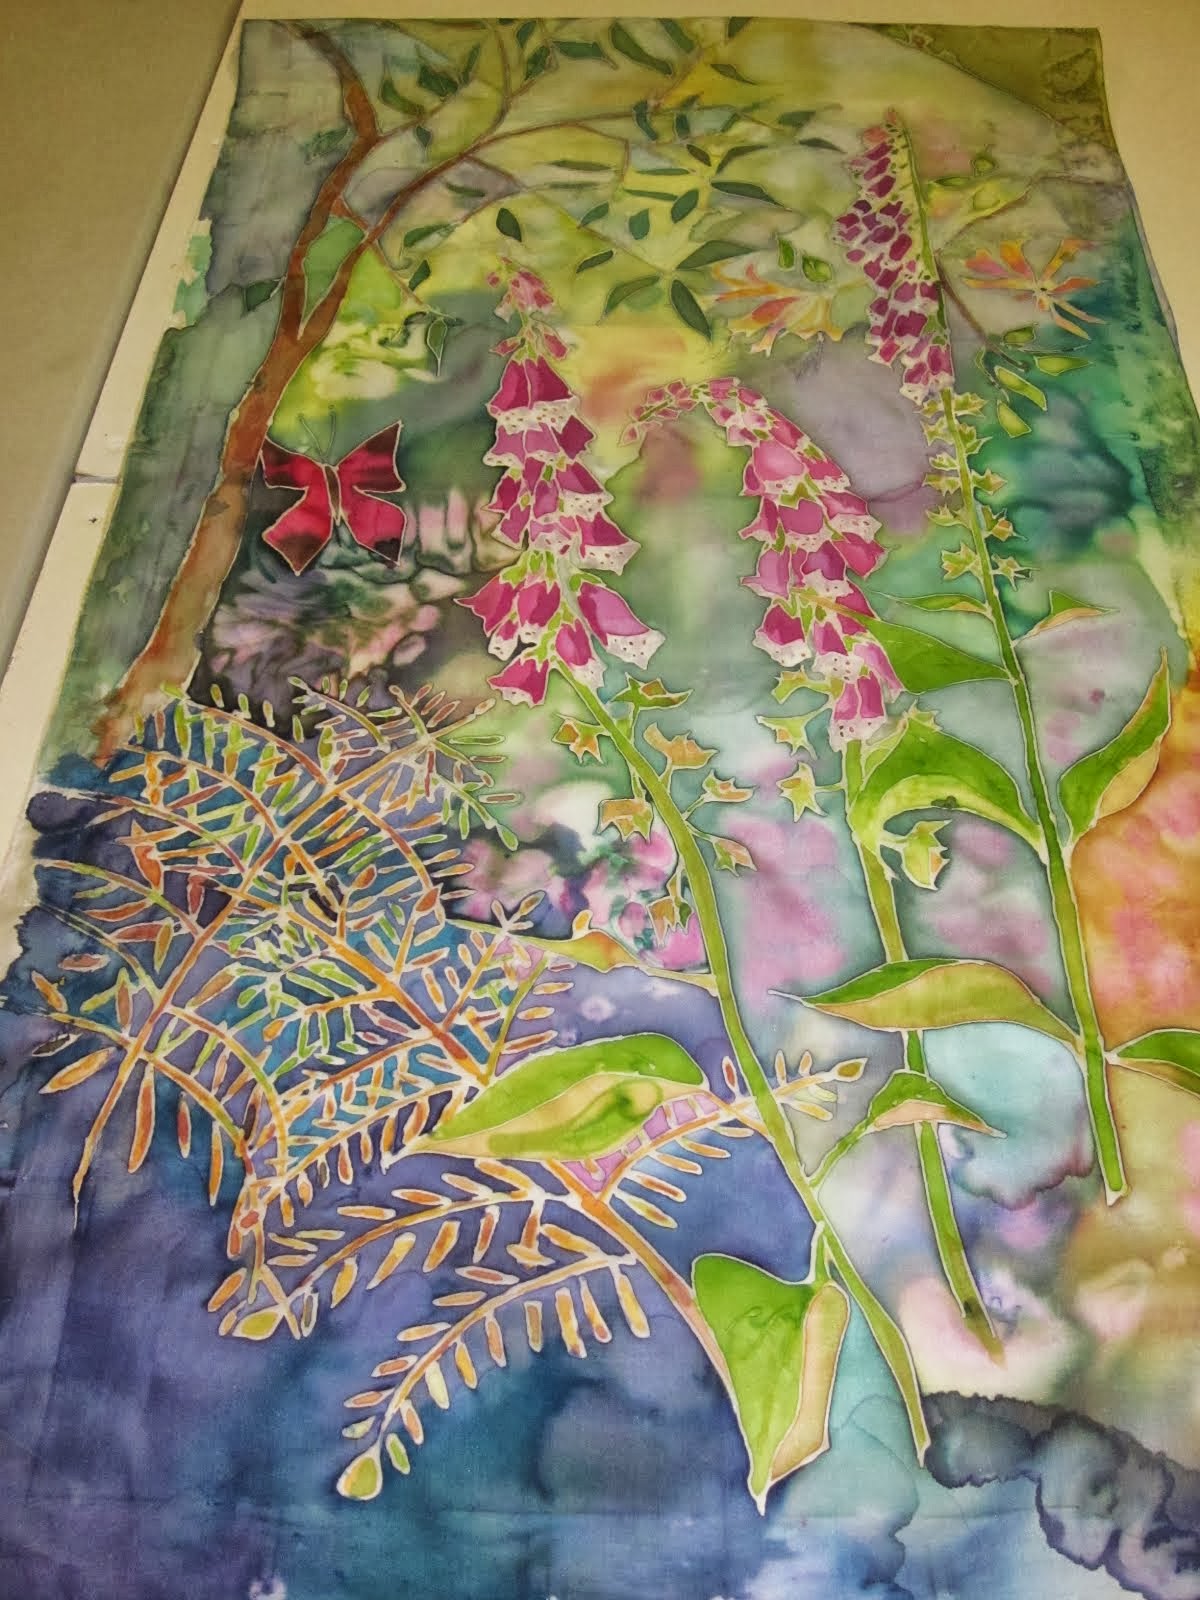 Next Silk Painting Courses Available